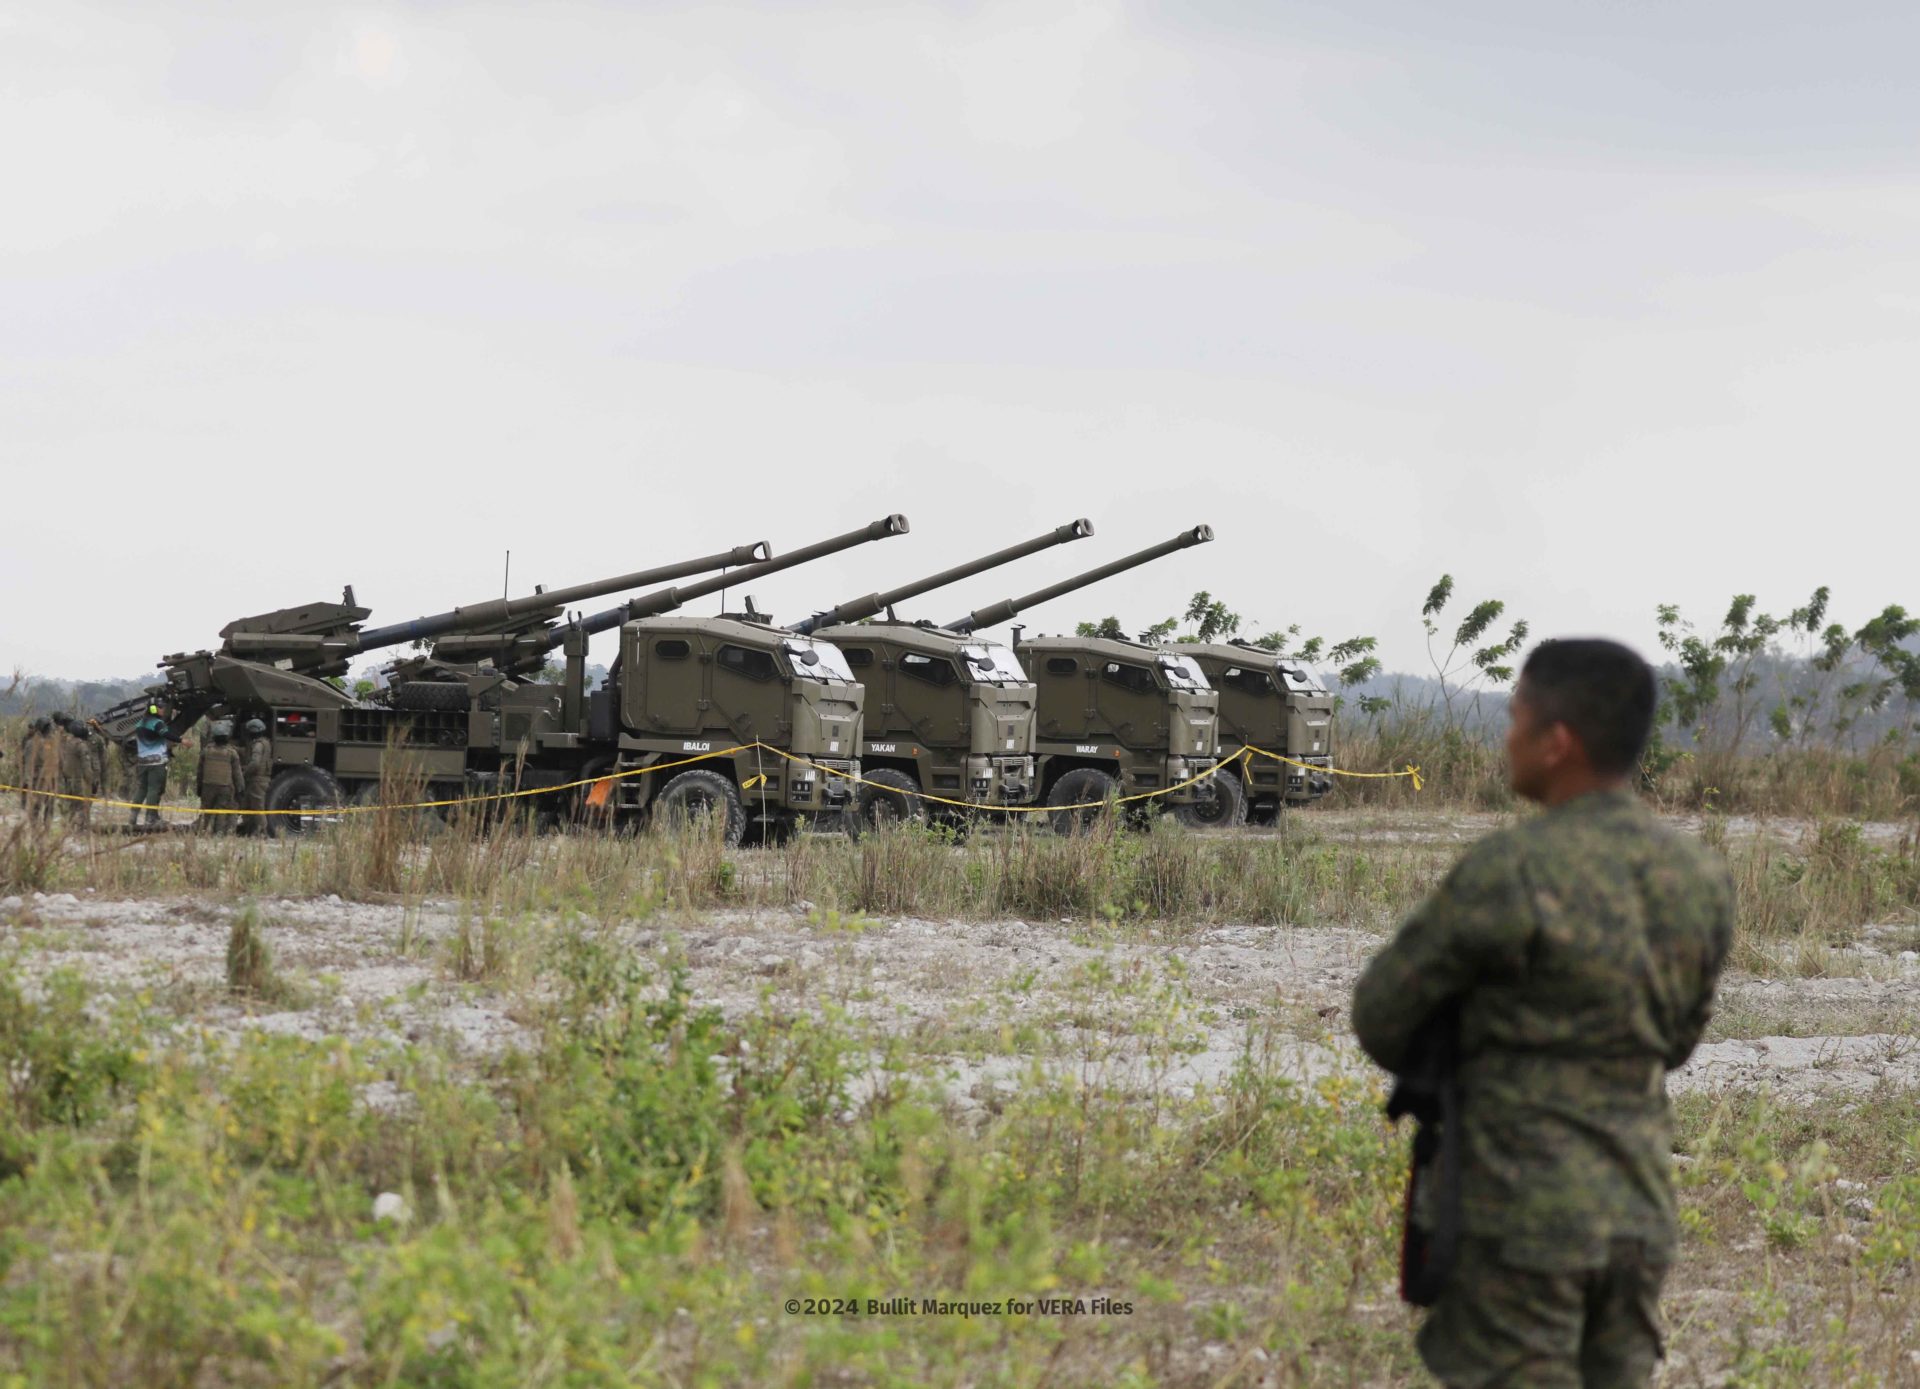 The Philippine Army shows off its territorial defense capability 2/8 Photo by Bullit Marquez for VERA Files